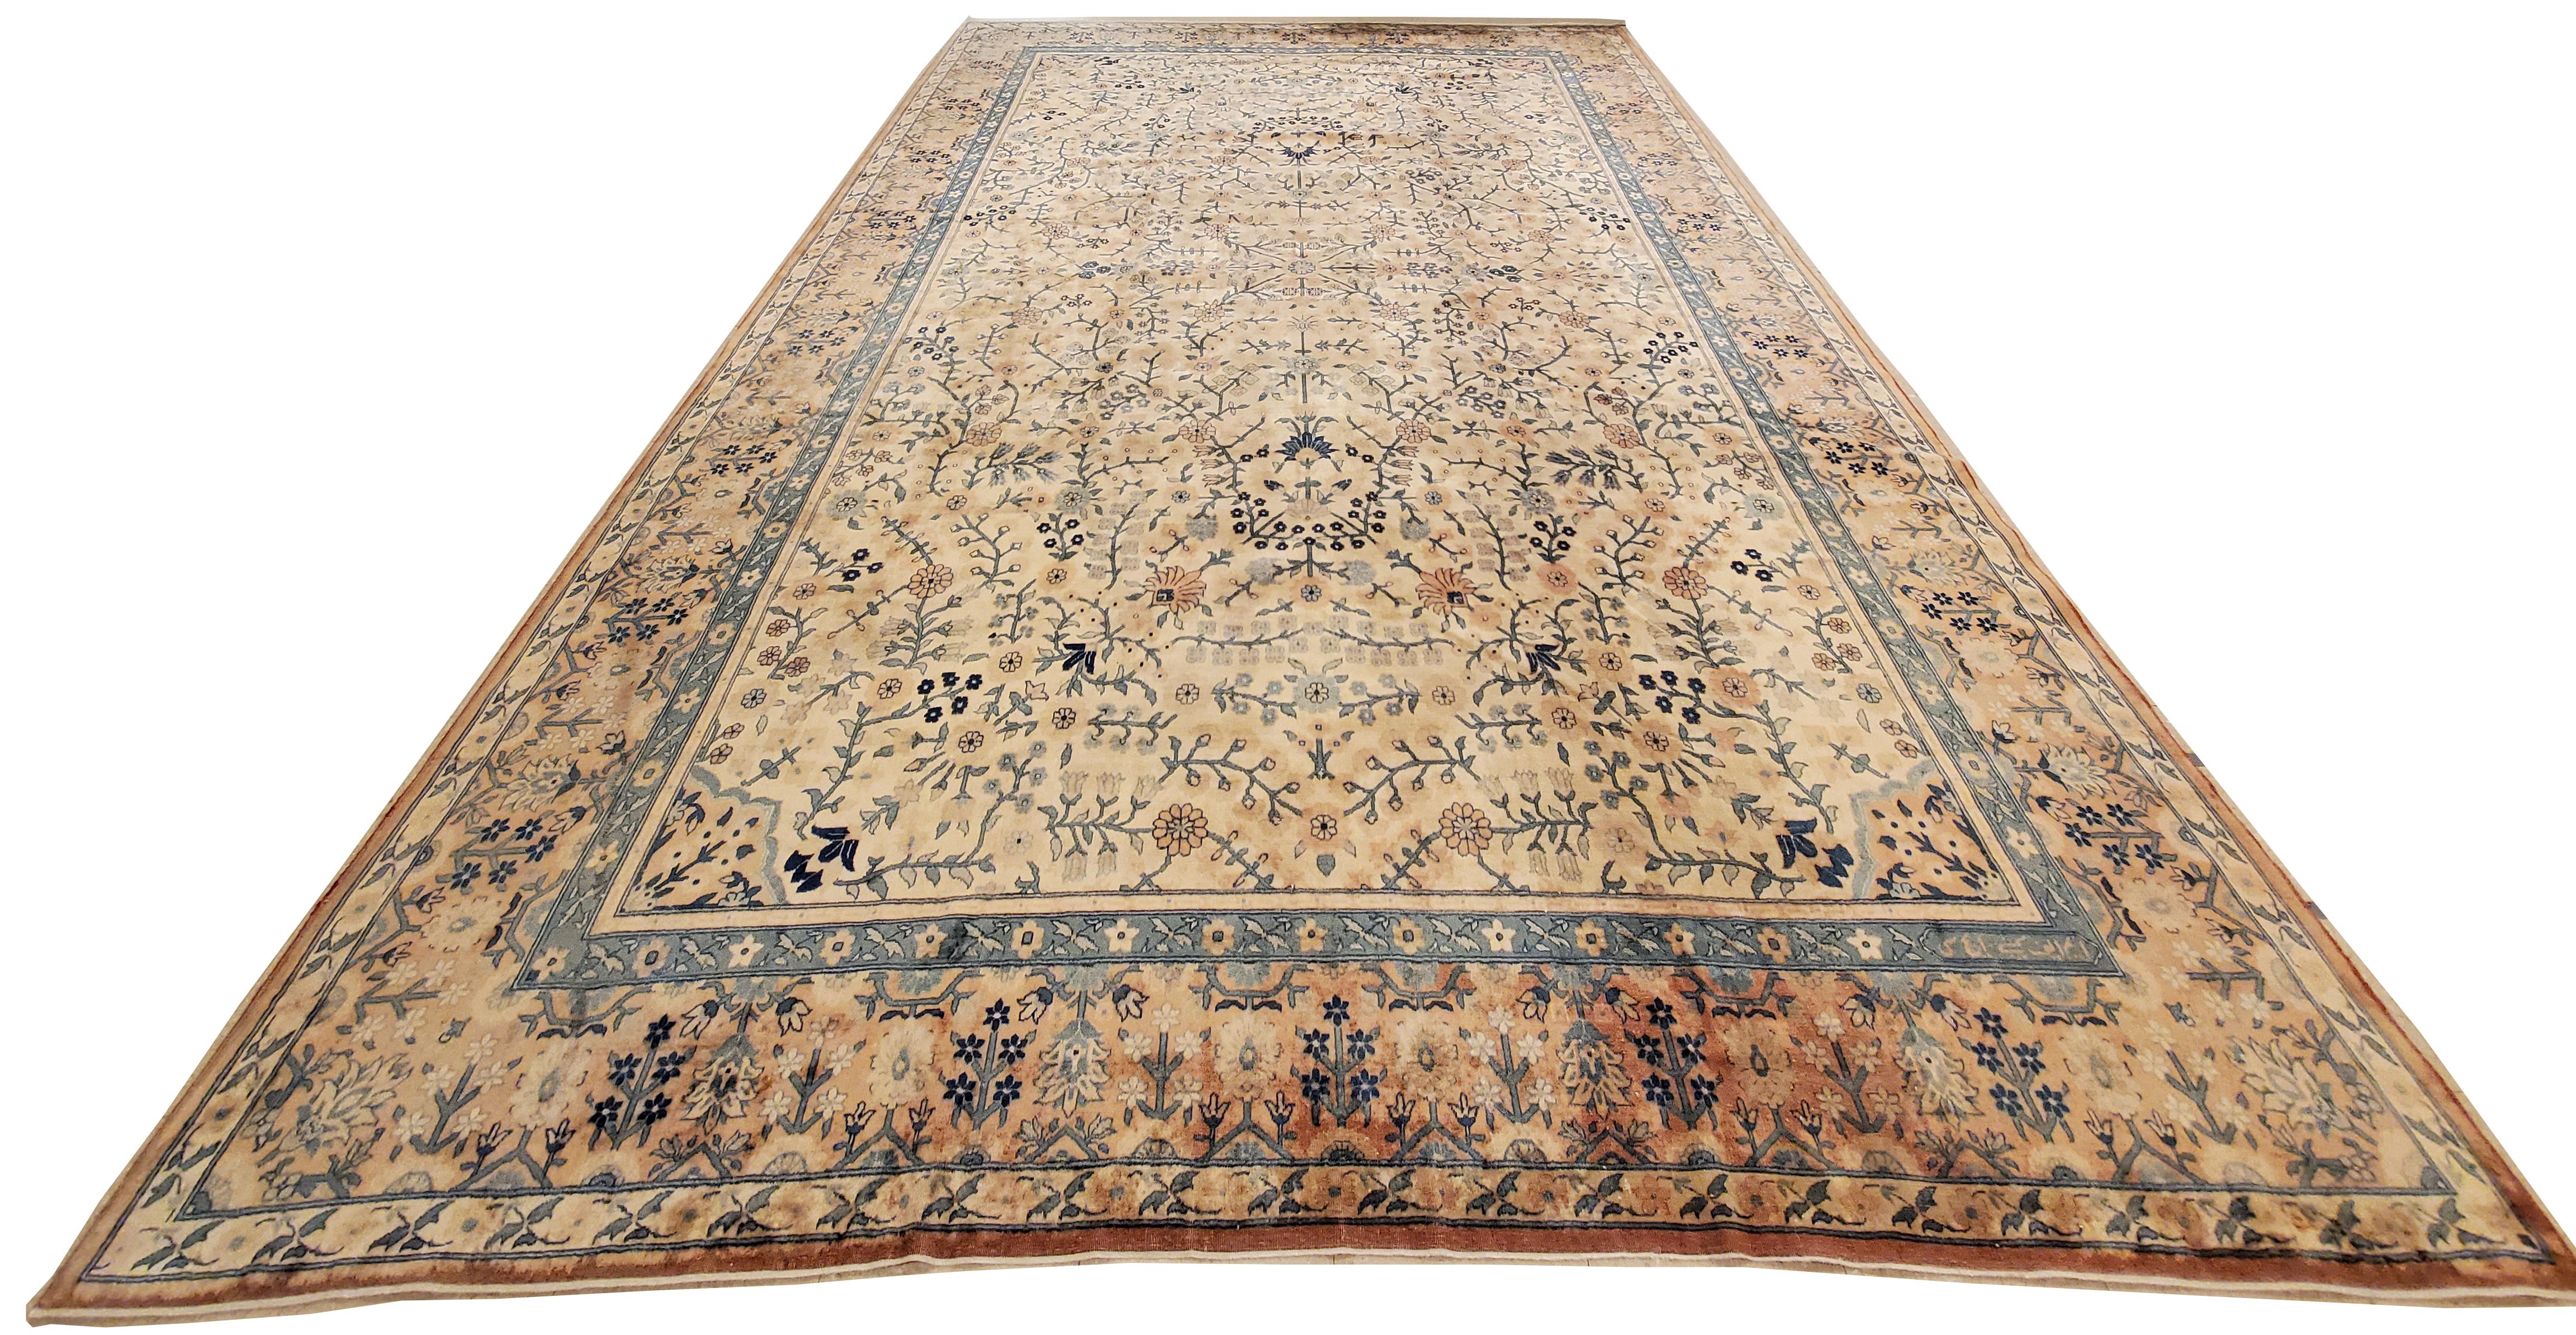 20th Century Antique Indian Amritsar Handmade Oriental Rug, Blue, Taupe Creams Allover Design For Sale